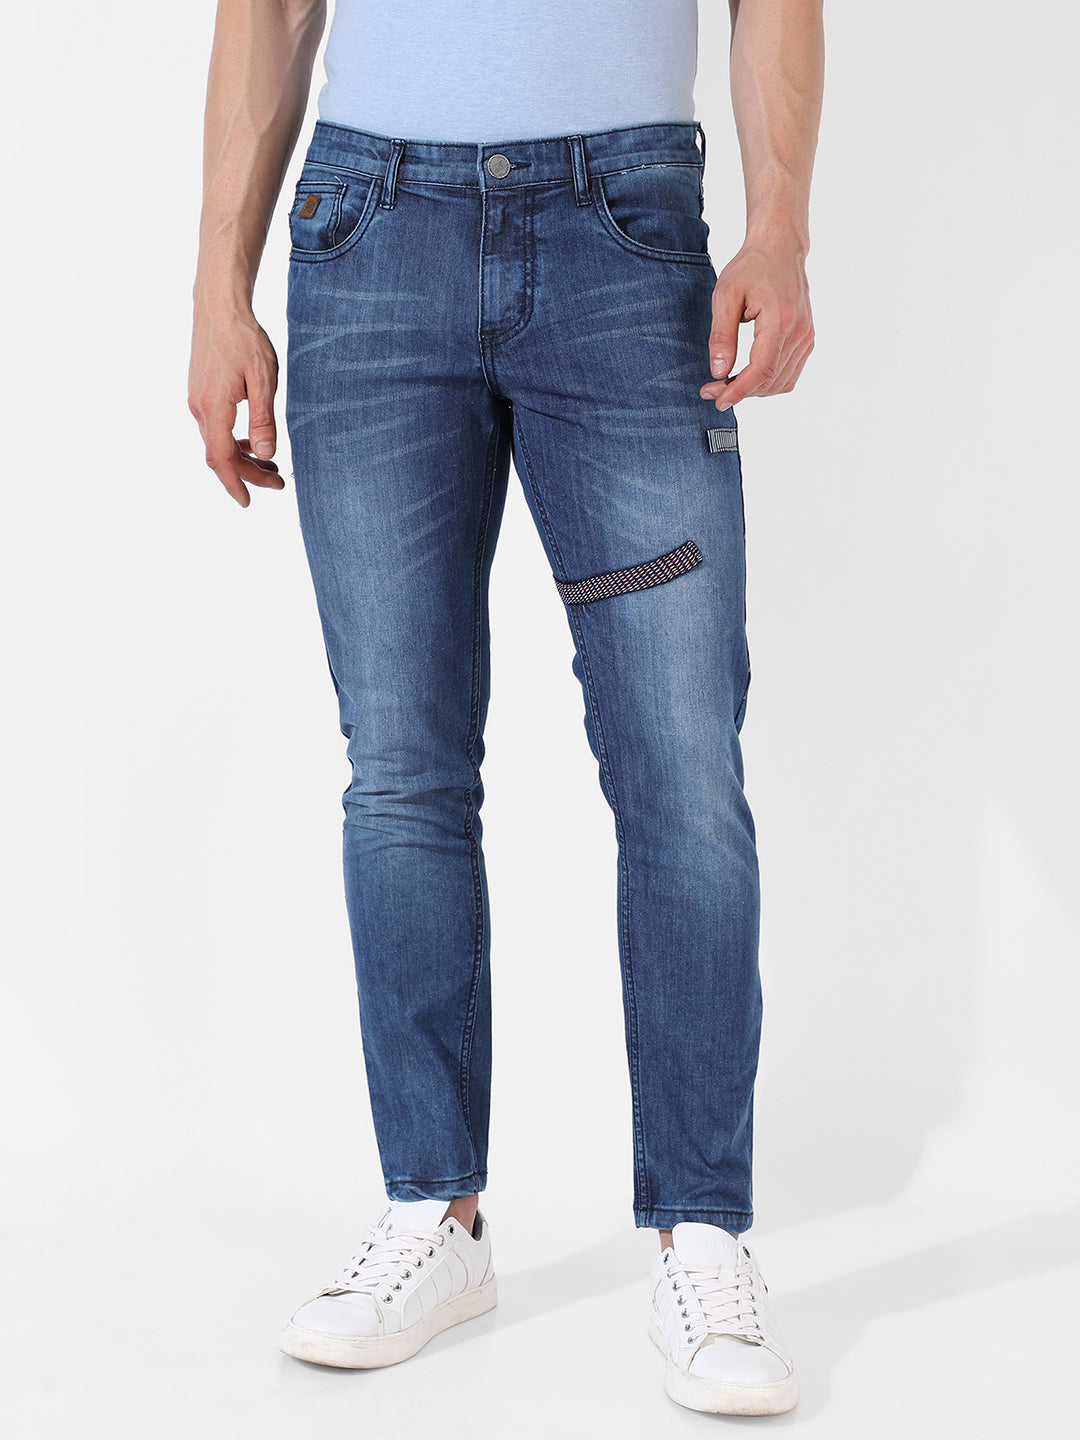 Embroidered Patched Denim Jeans